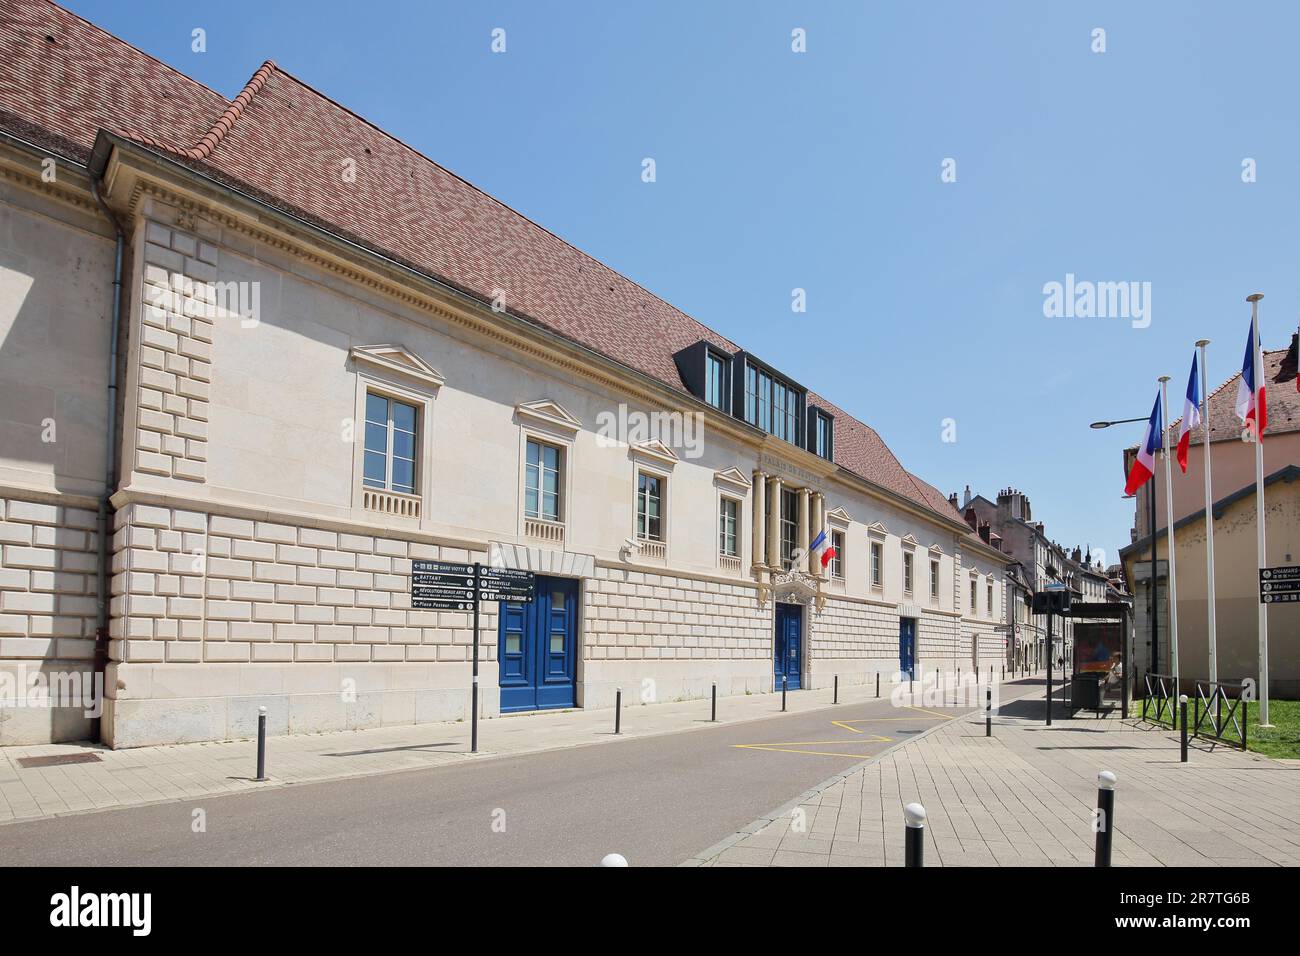 Palais de Justice with French national flags, Palace of Justice, Besancon, Doubs, France Stock Photo